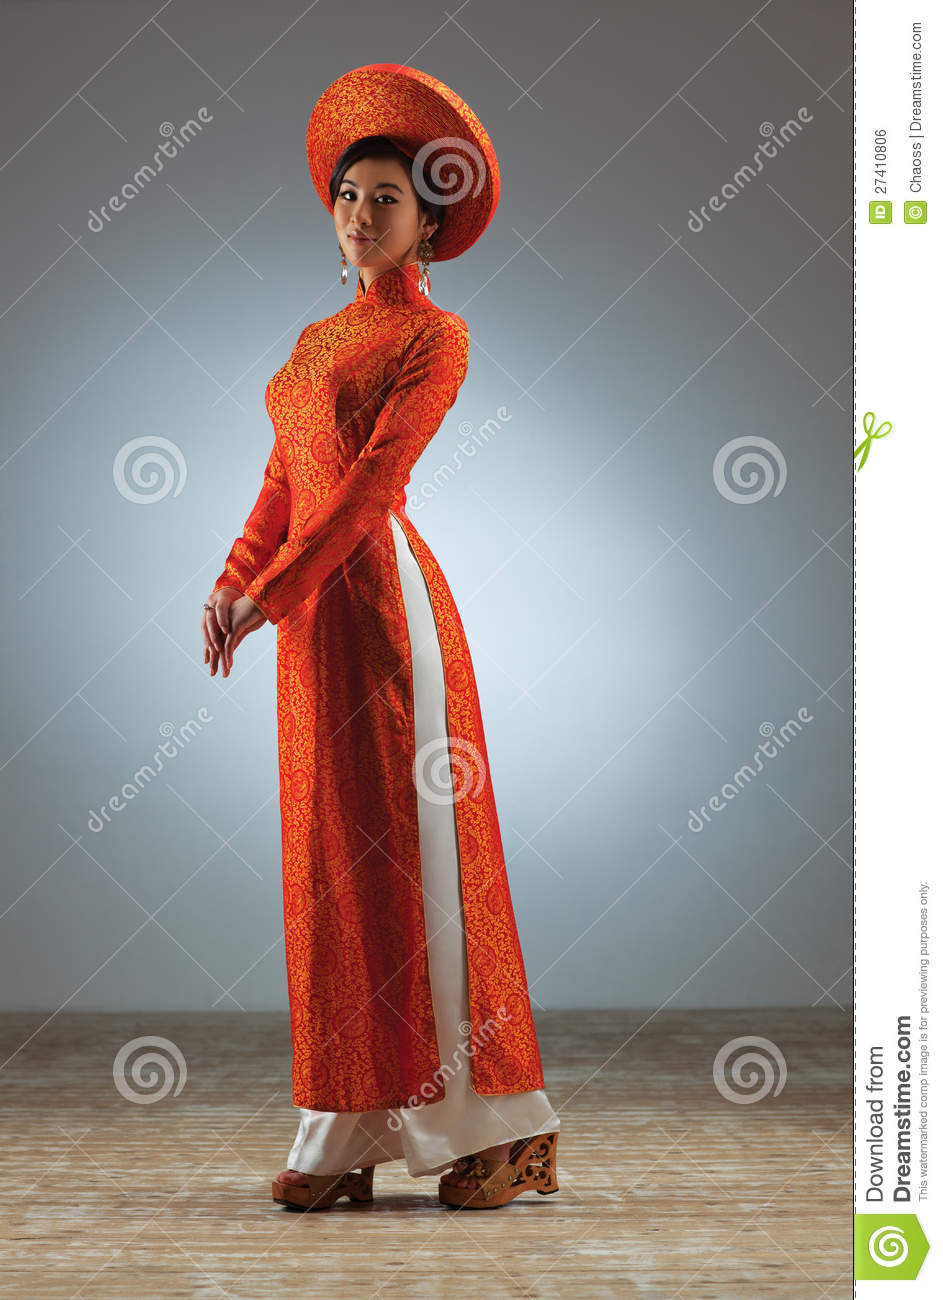 Young Vietnamese Woman Royalty Free Stock Image   Image  27410806